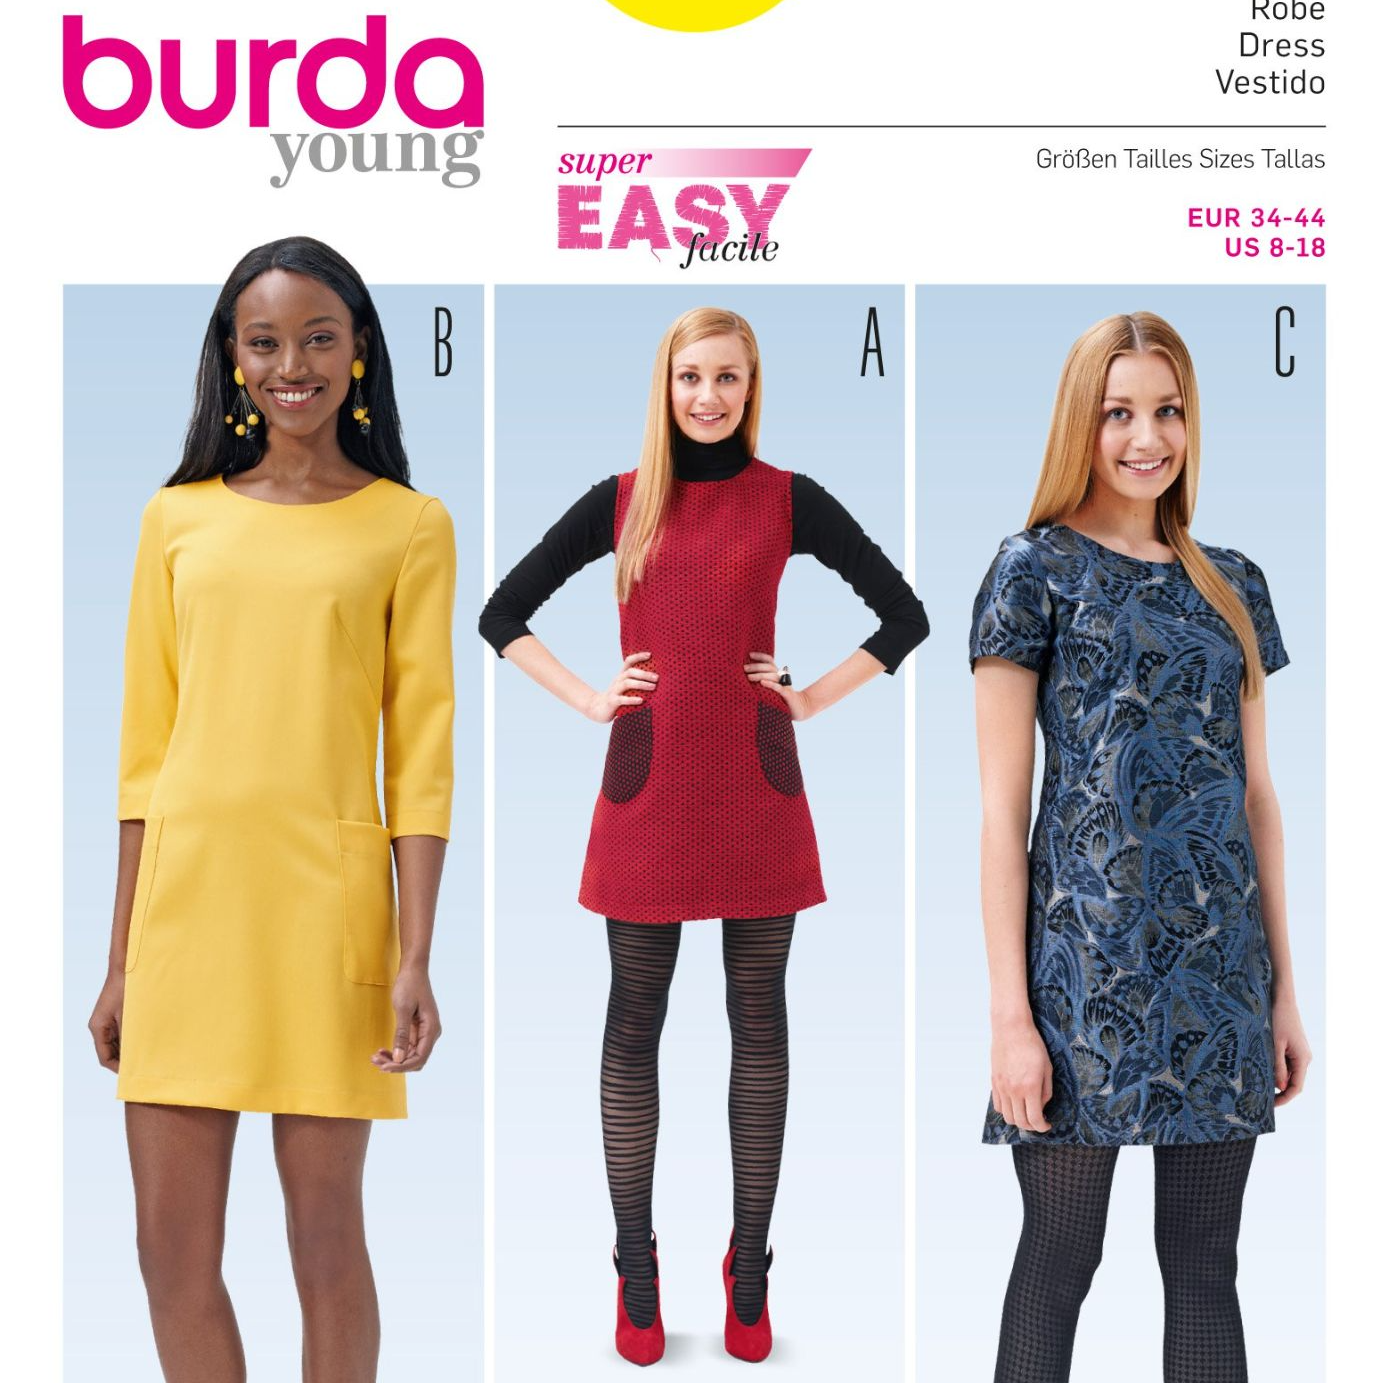 Burda  6721 sewing pattern for improving dressmakers - involves some fitting